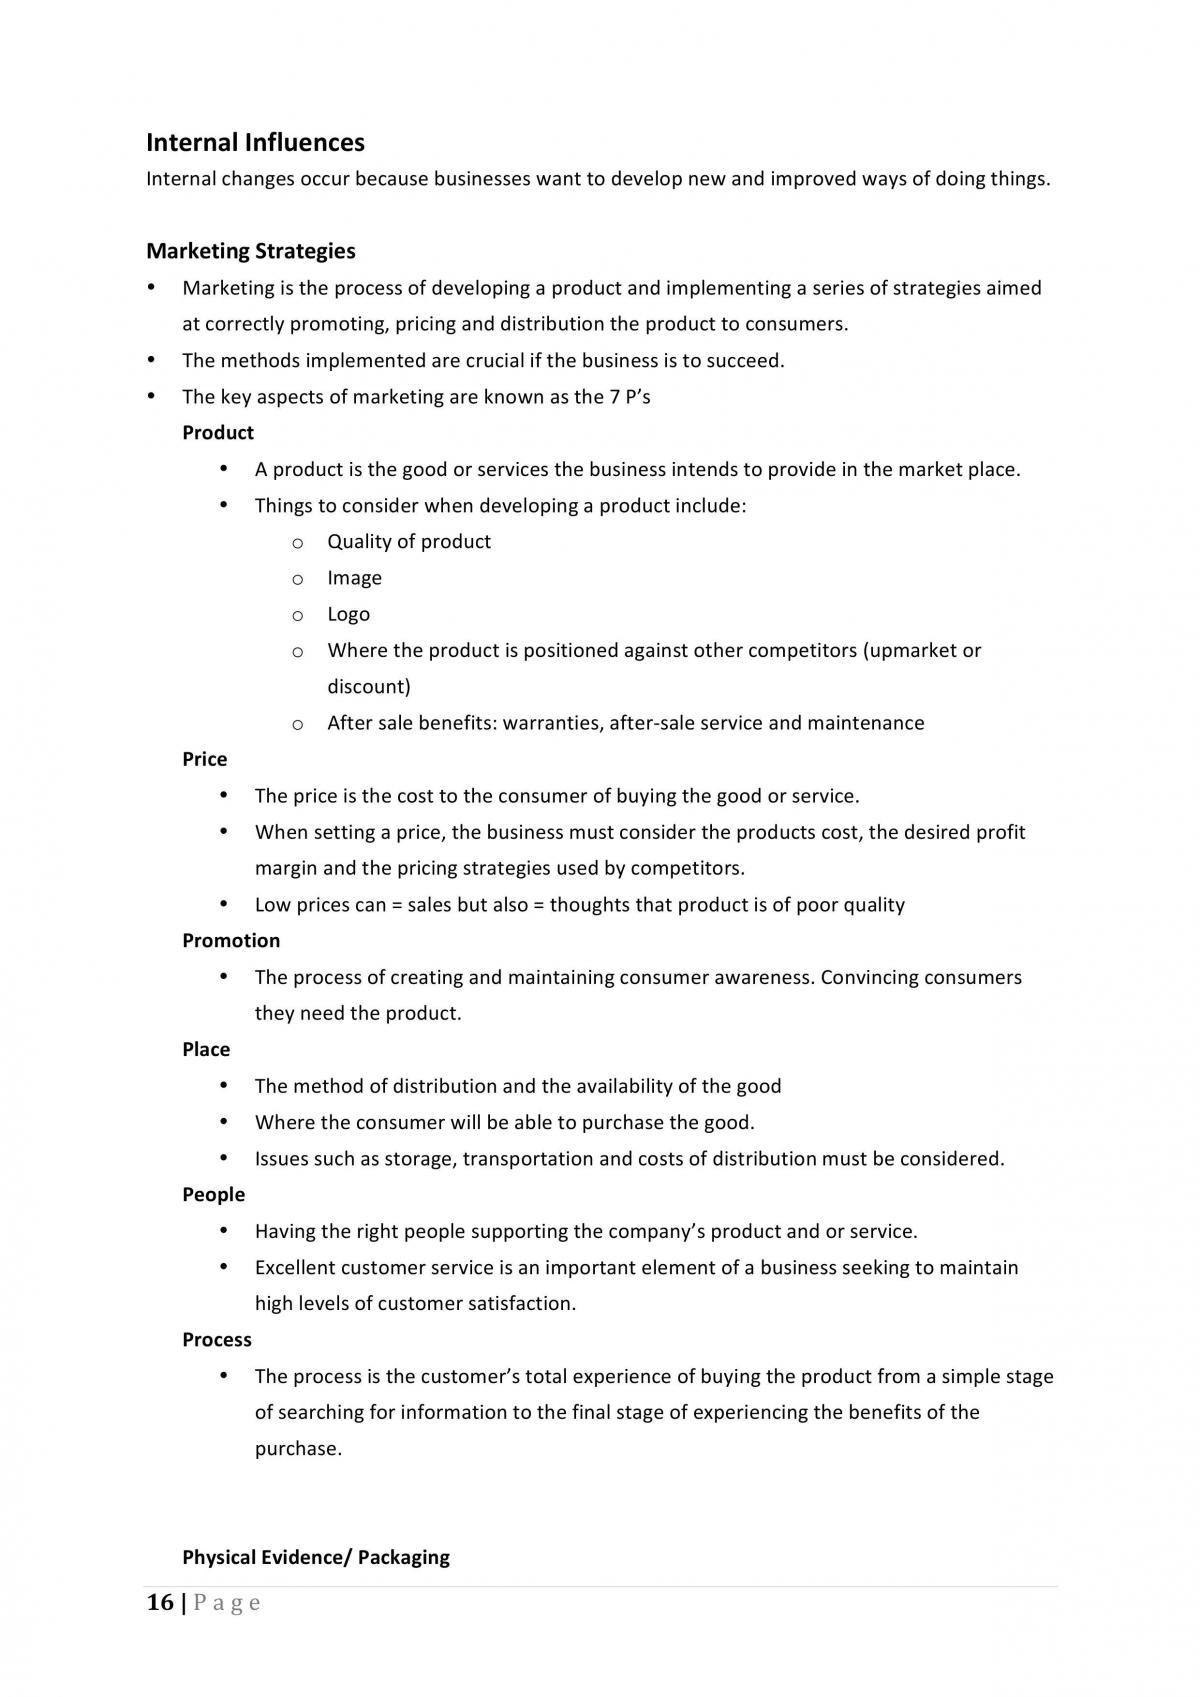 Business Studies Topic 1  - Page 16